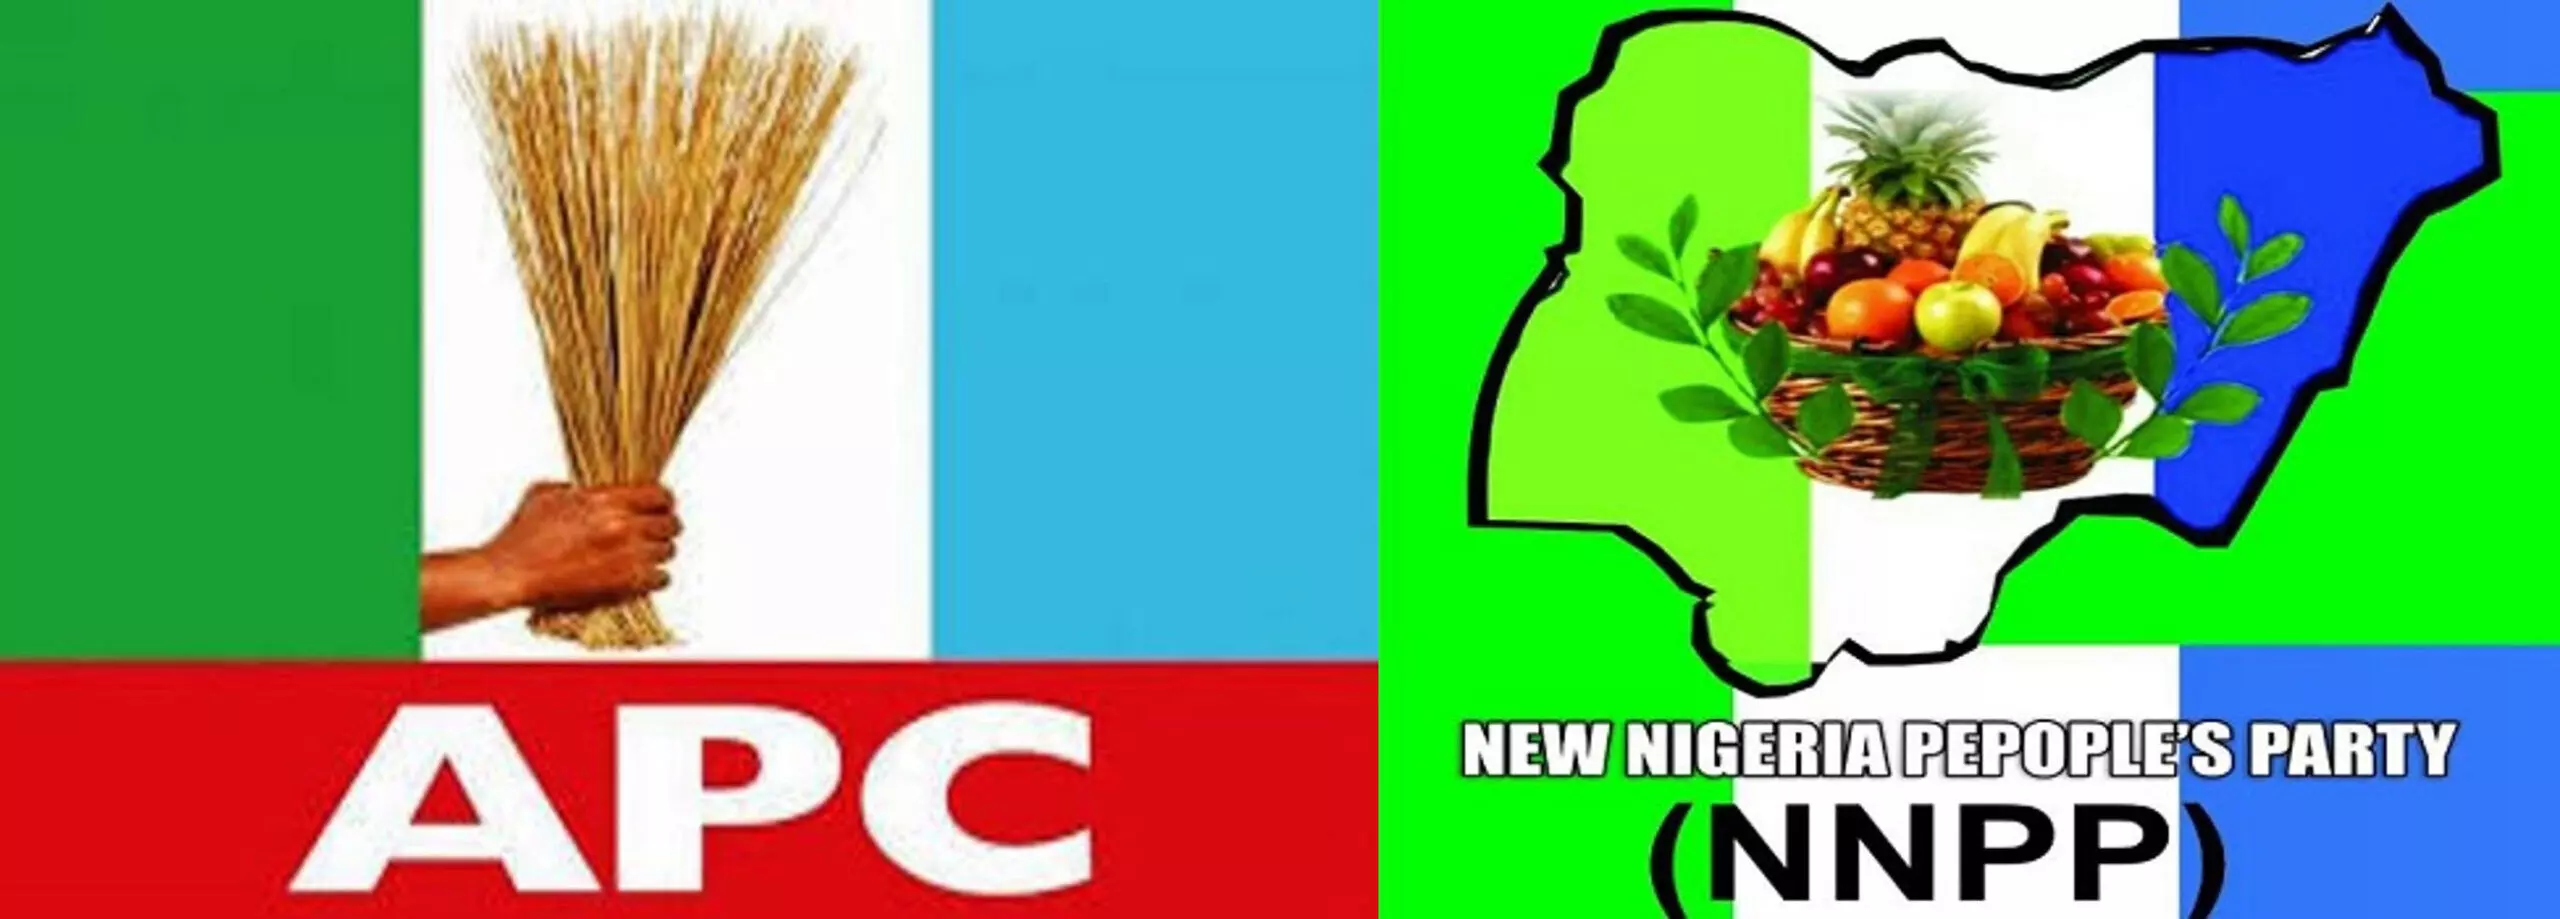 Kano: We stand by our peace accord, say APC, NNPP